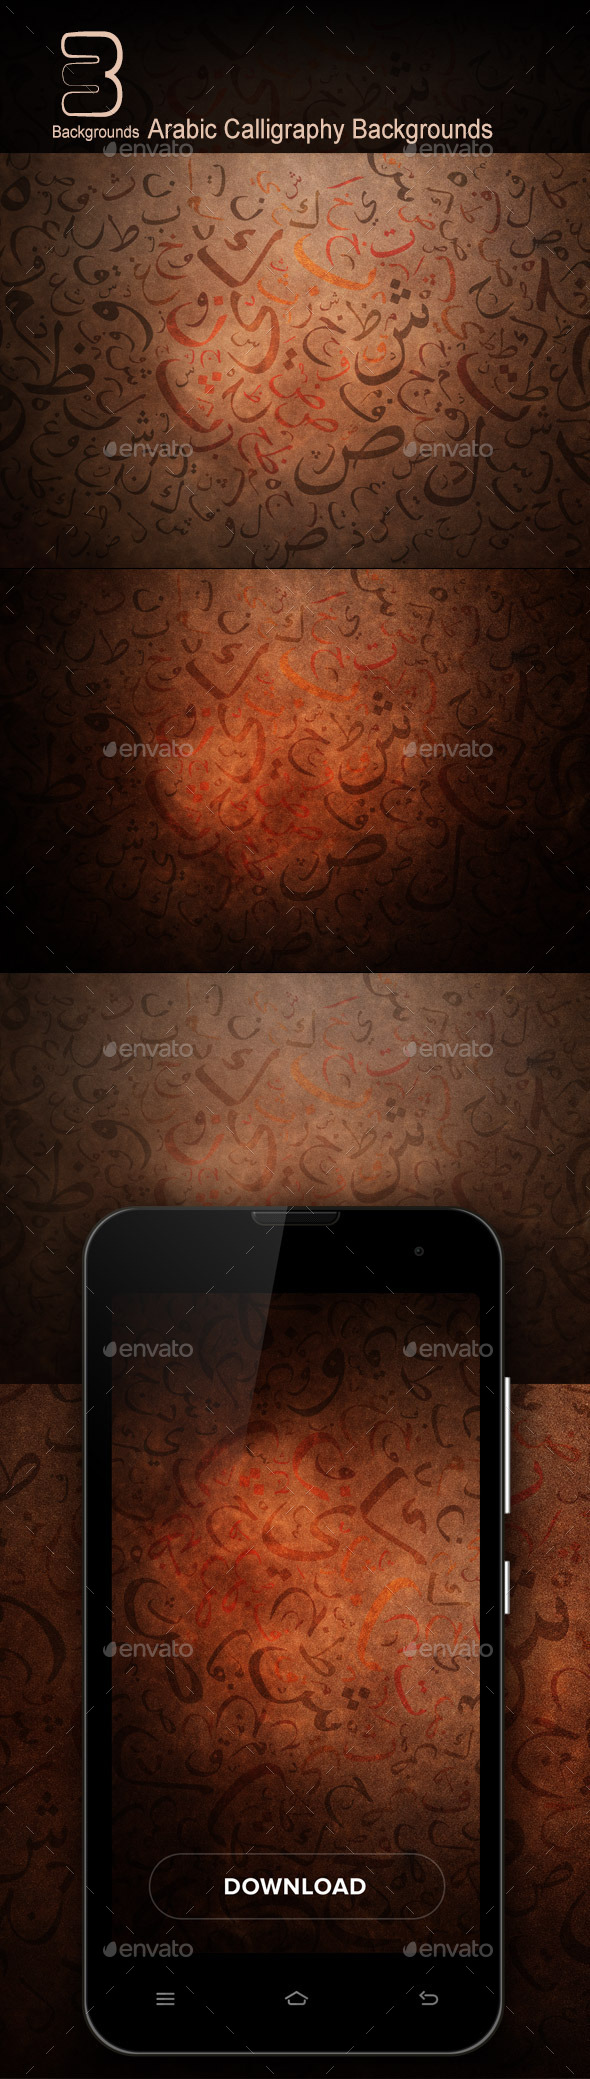 Arabic Calligraphy Backgrounds by ARABISQ | GraphicRiver